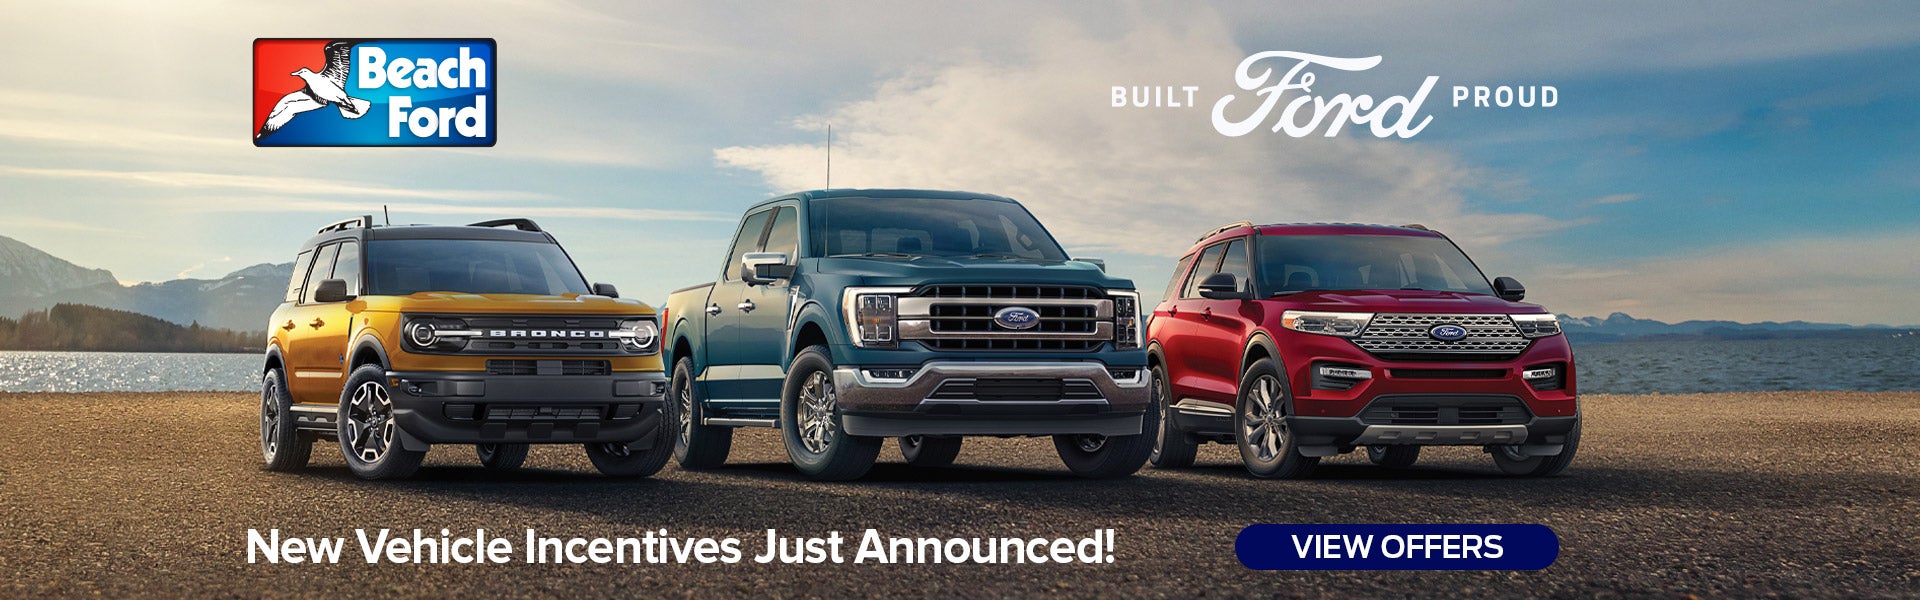 Beach Ford Vehicle Incentive